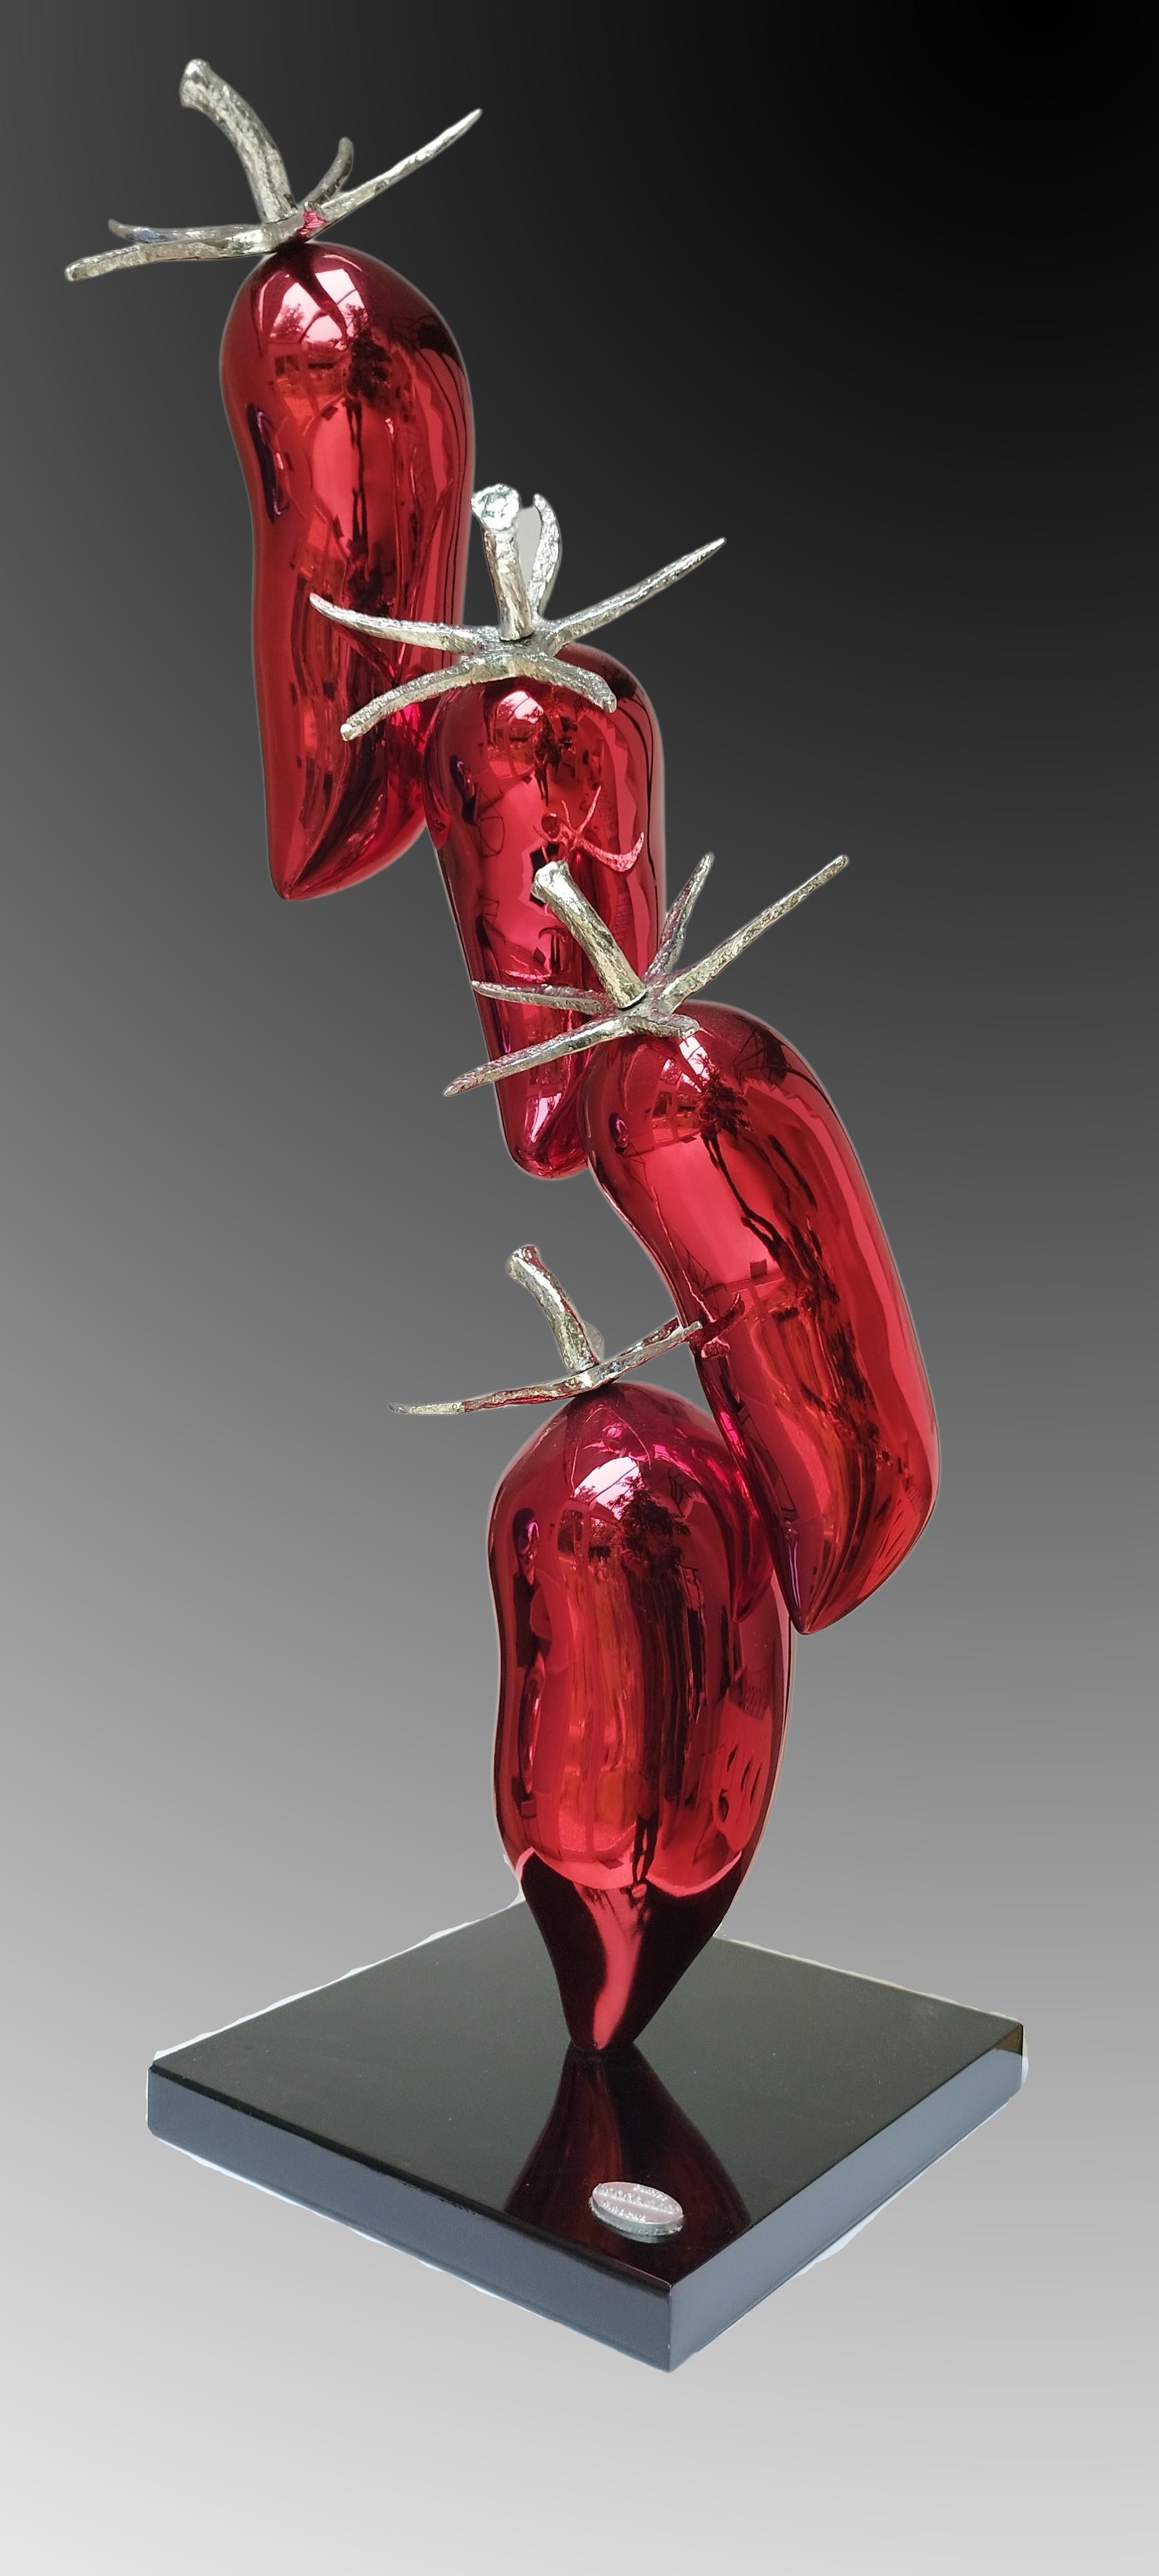 Chili pepper in polychrome bronze The contemporary work of Patrick Laroche is characterized by colorful and oversized installations. In 2012, he launched a collection entitled 